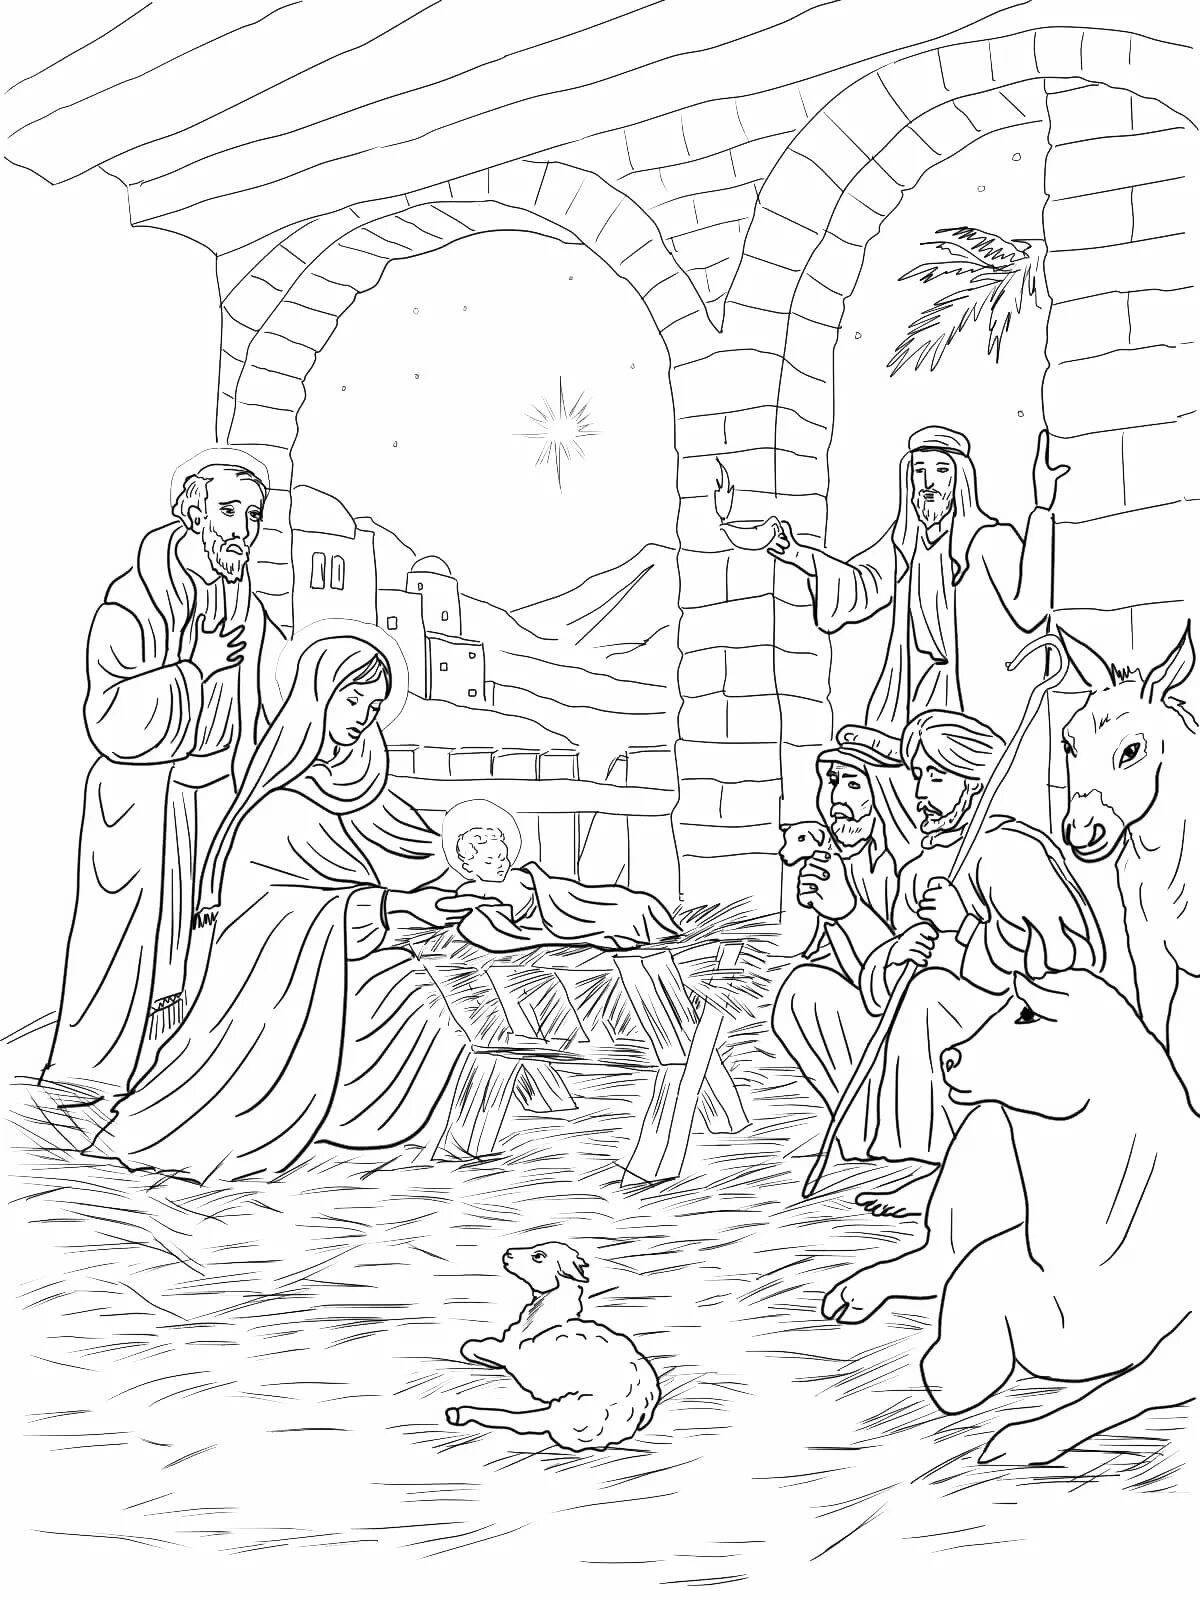 Coloring page heavenly birth of jesus christ